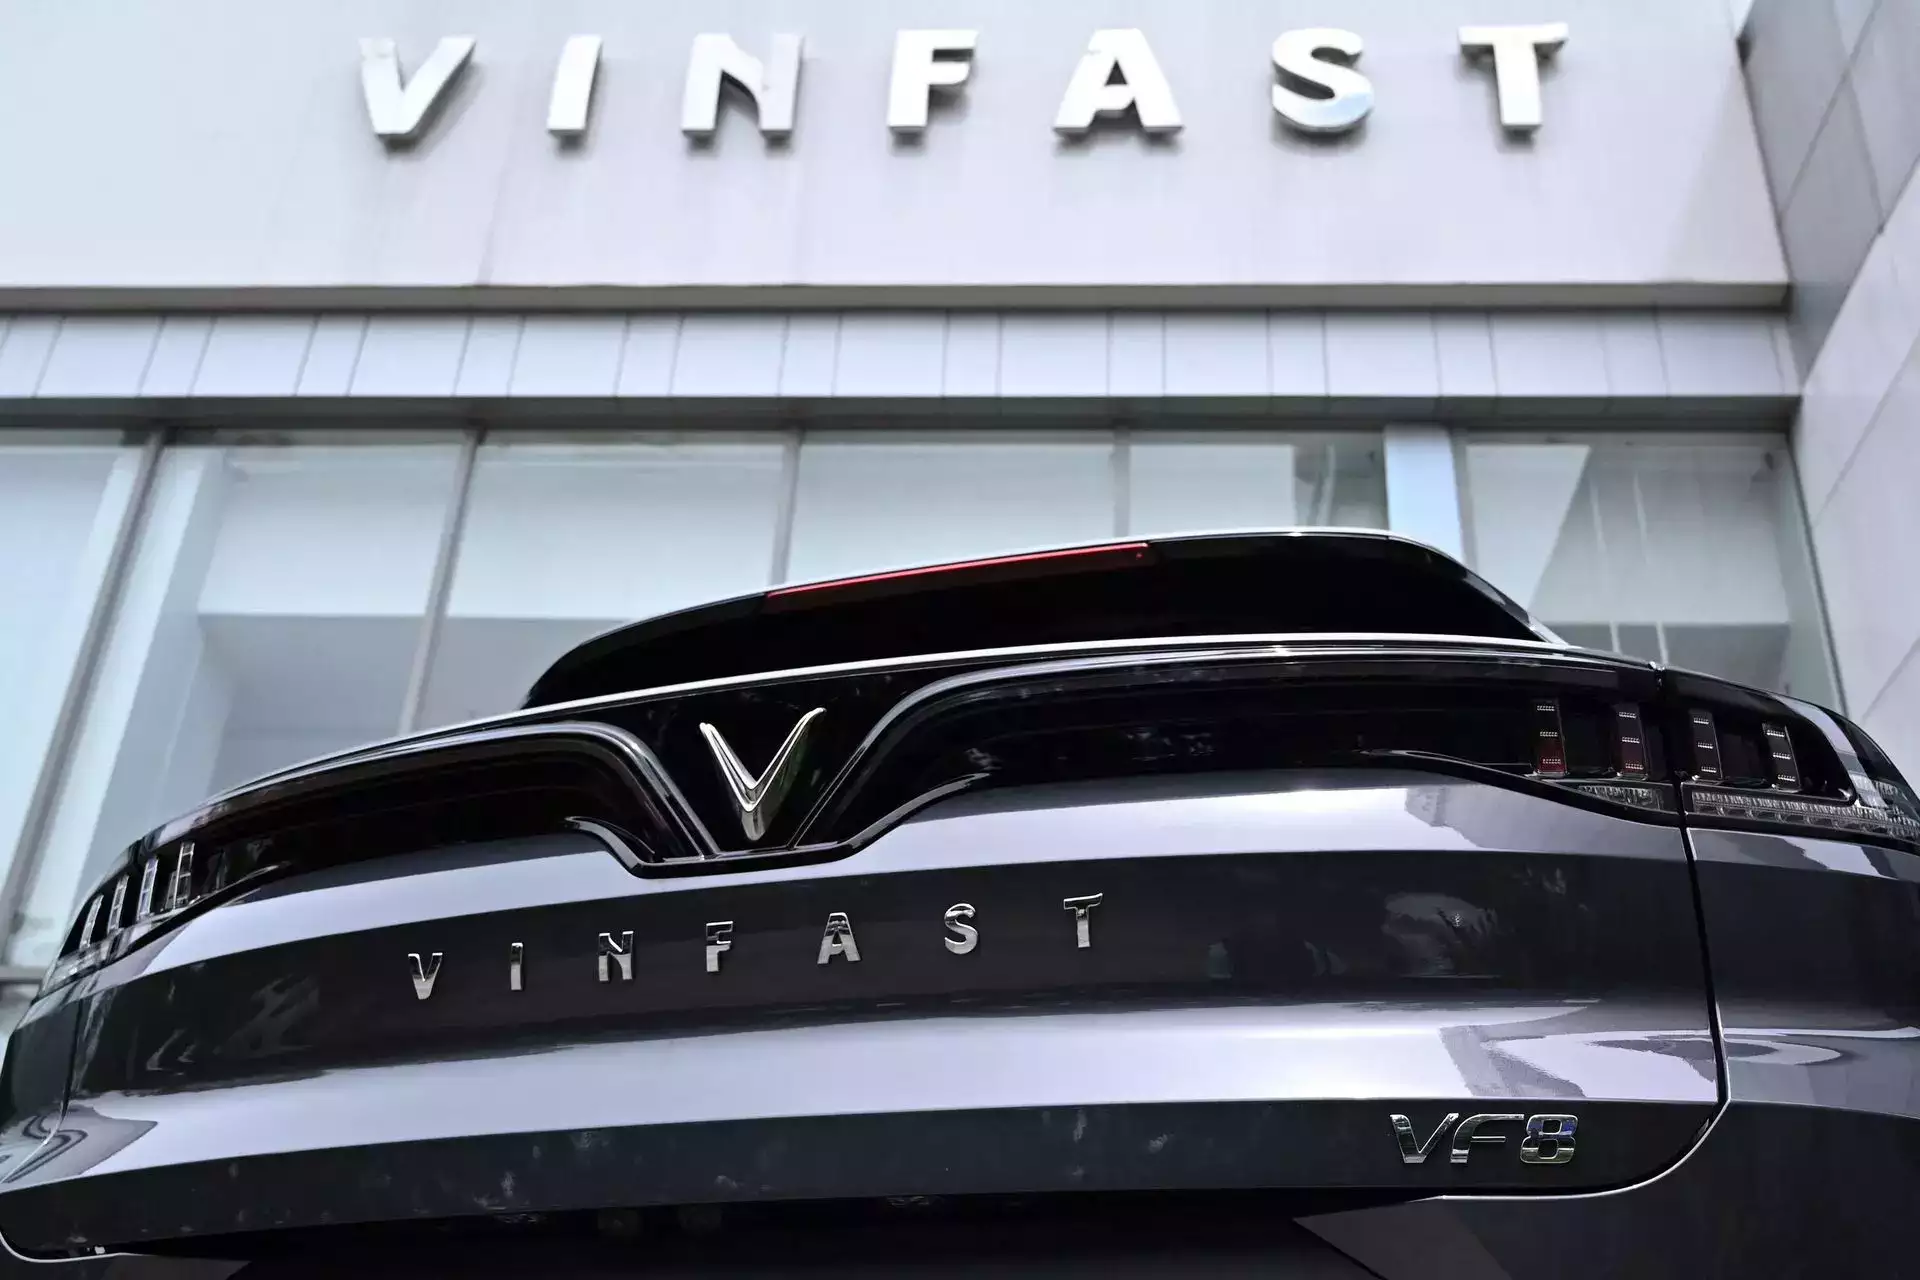 VinFast, a competitor of Tesla and a Vietnamese EV maker, is reportedly set to make a billion-dollar investment in India, according to a recent report